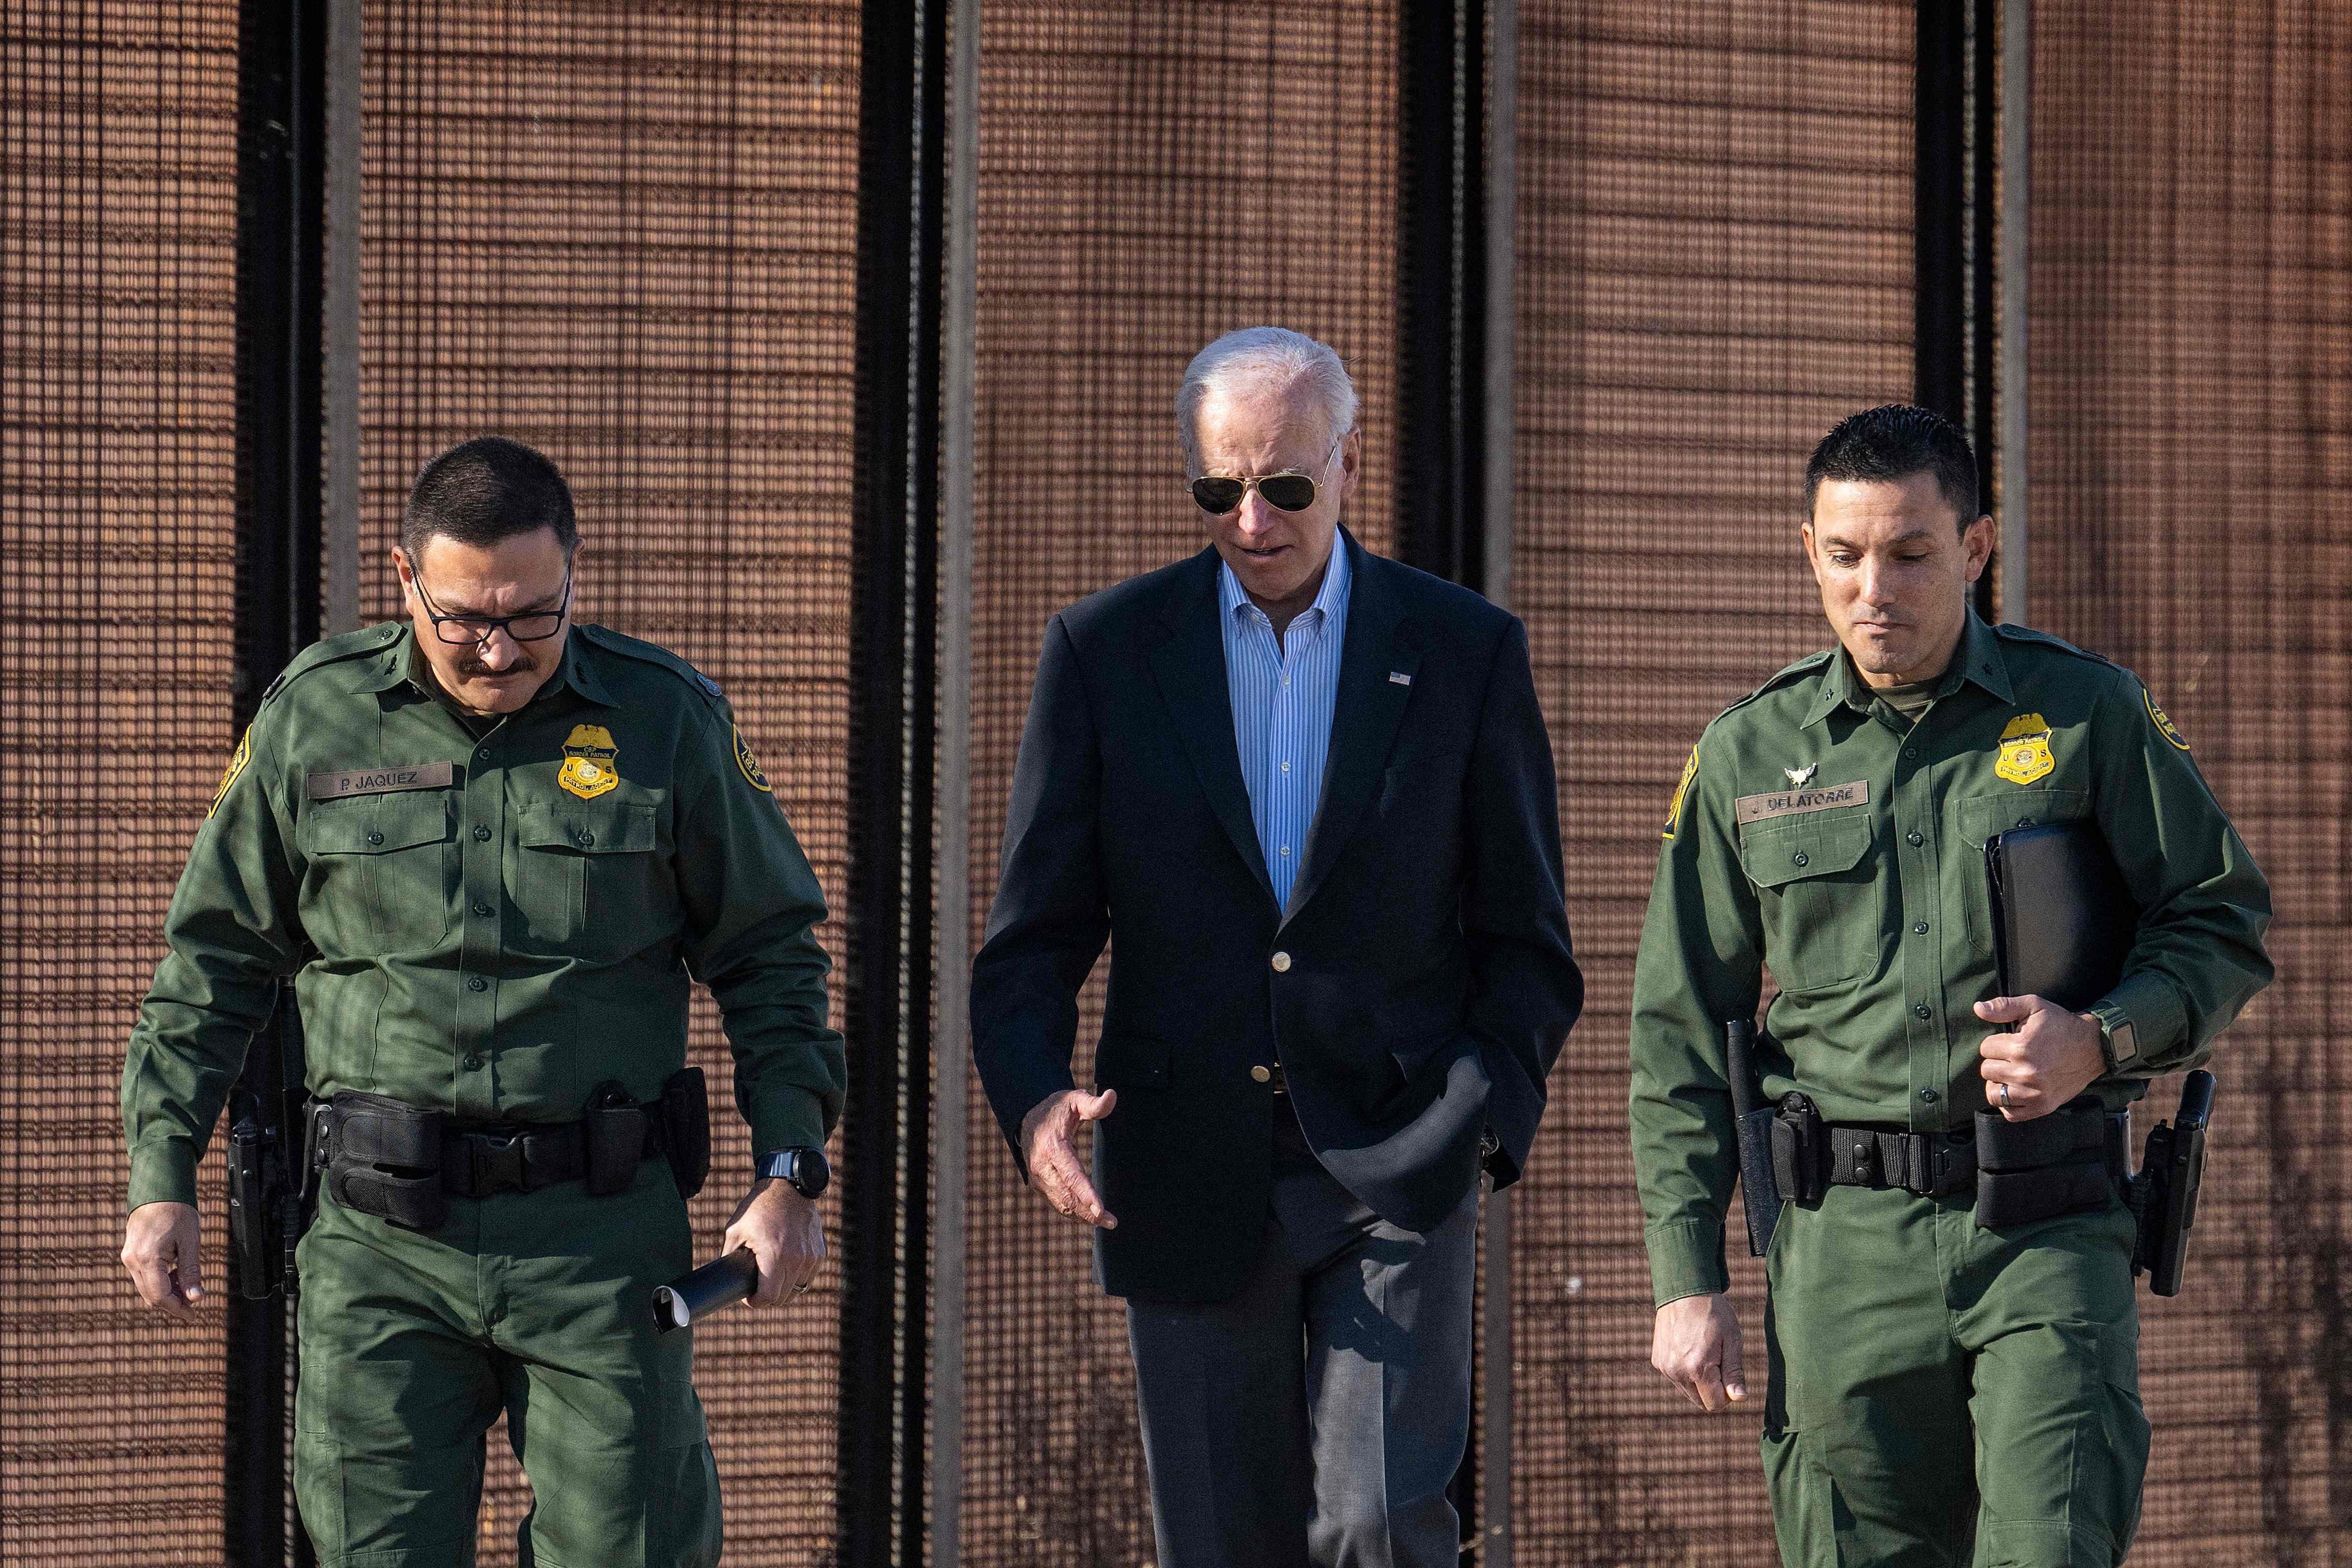 Biden in aviators walking between two uniformed officers with the border fence looming behind them